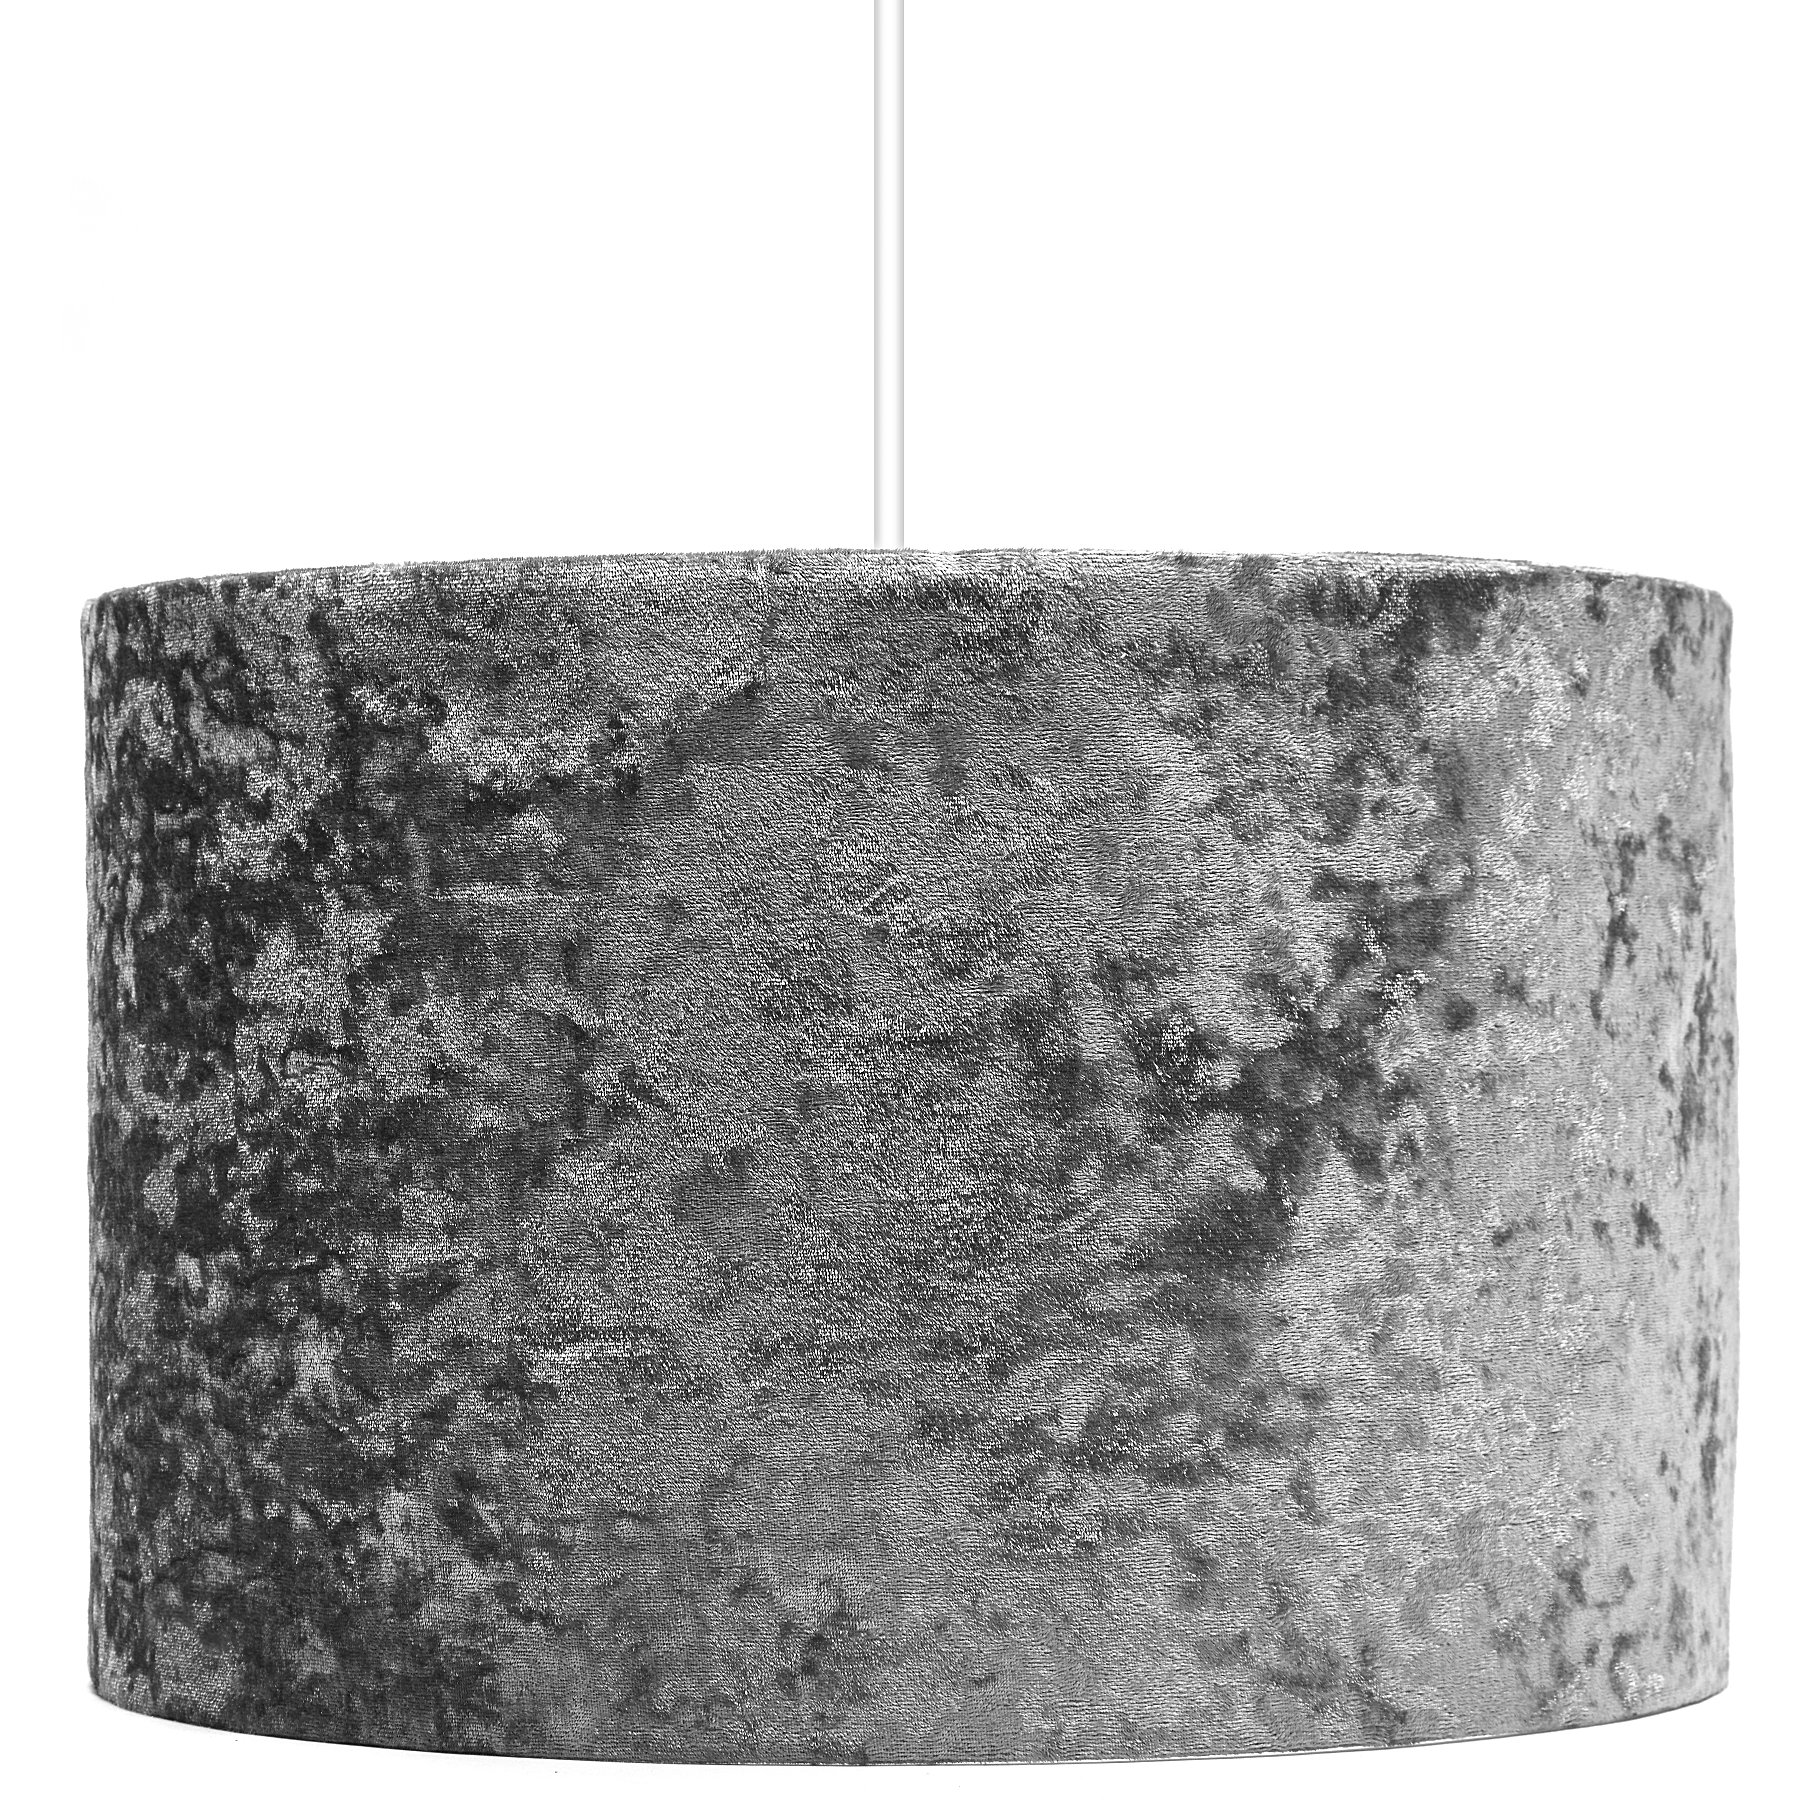 Charcoal Crushed Velvet Ceiling Shade, Grey Textured Lamp Shade